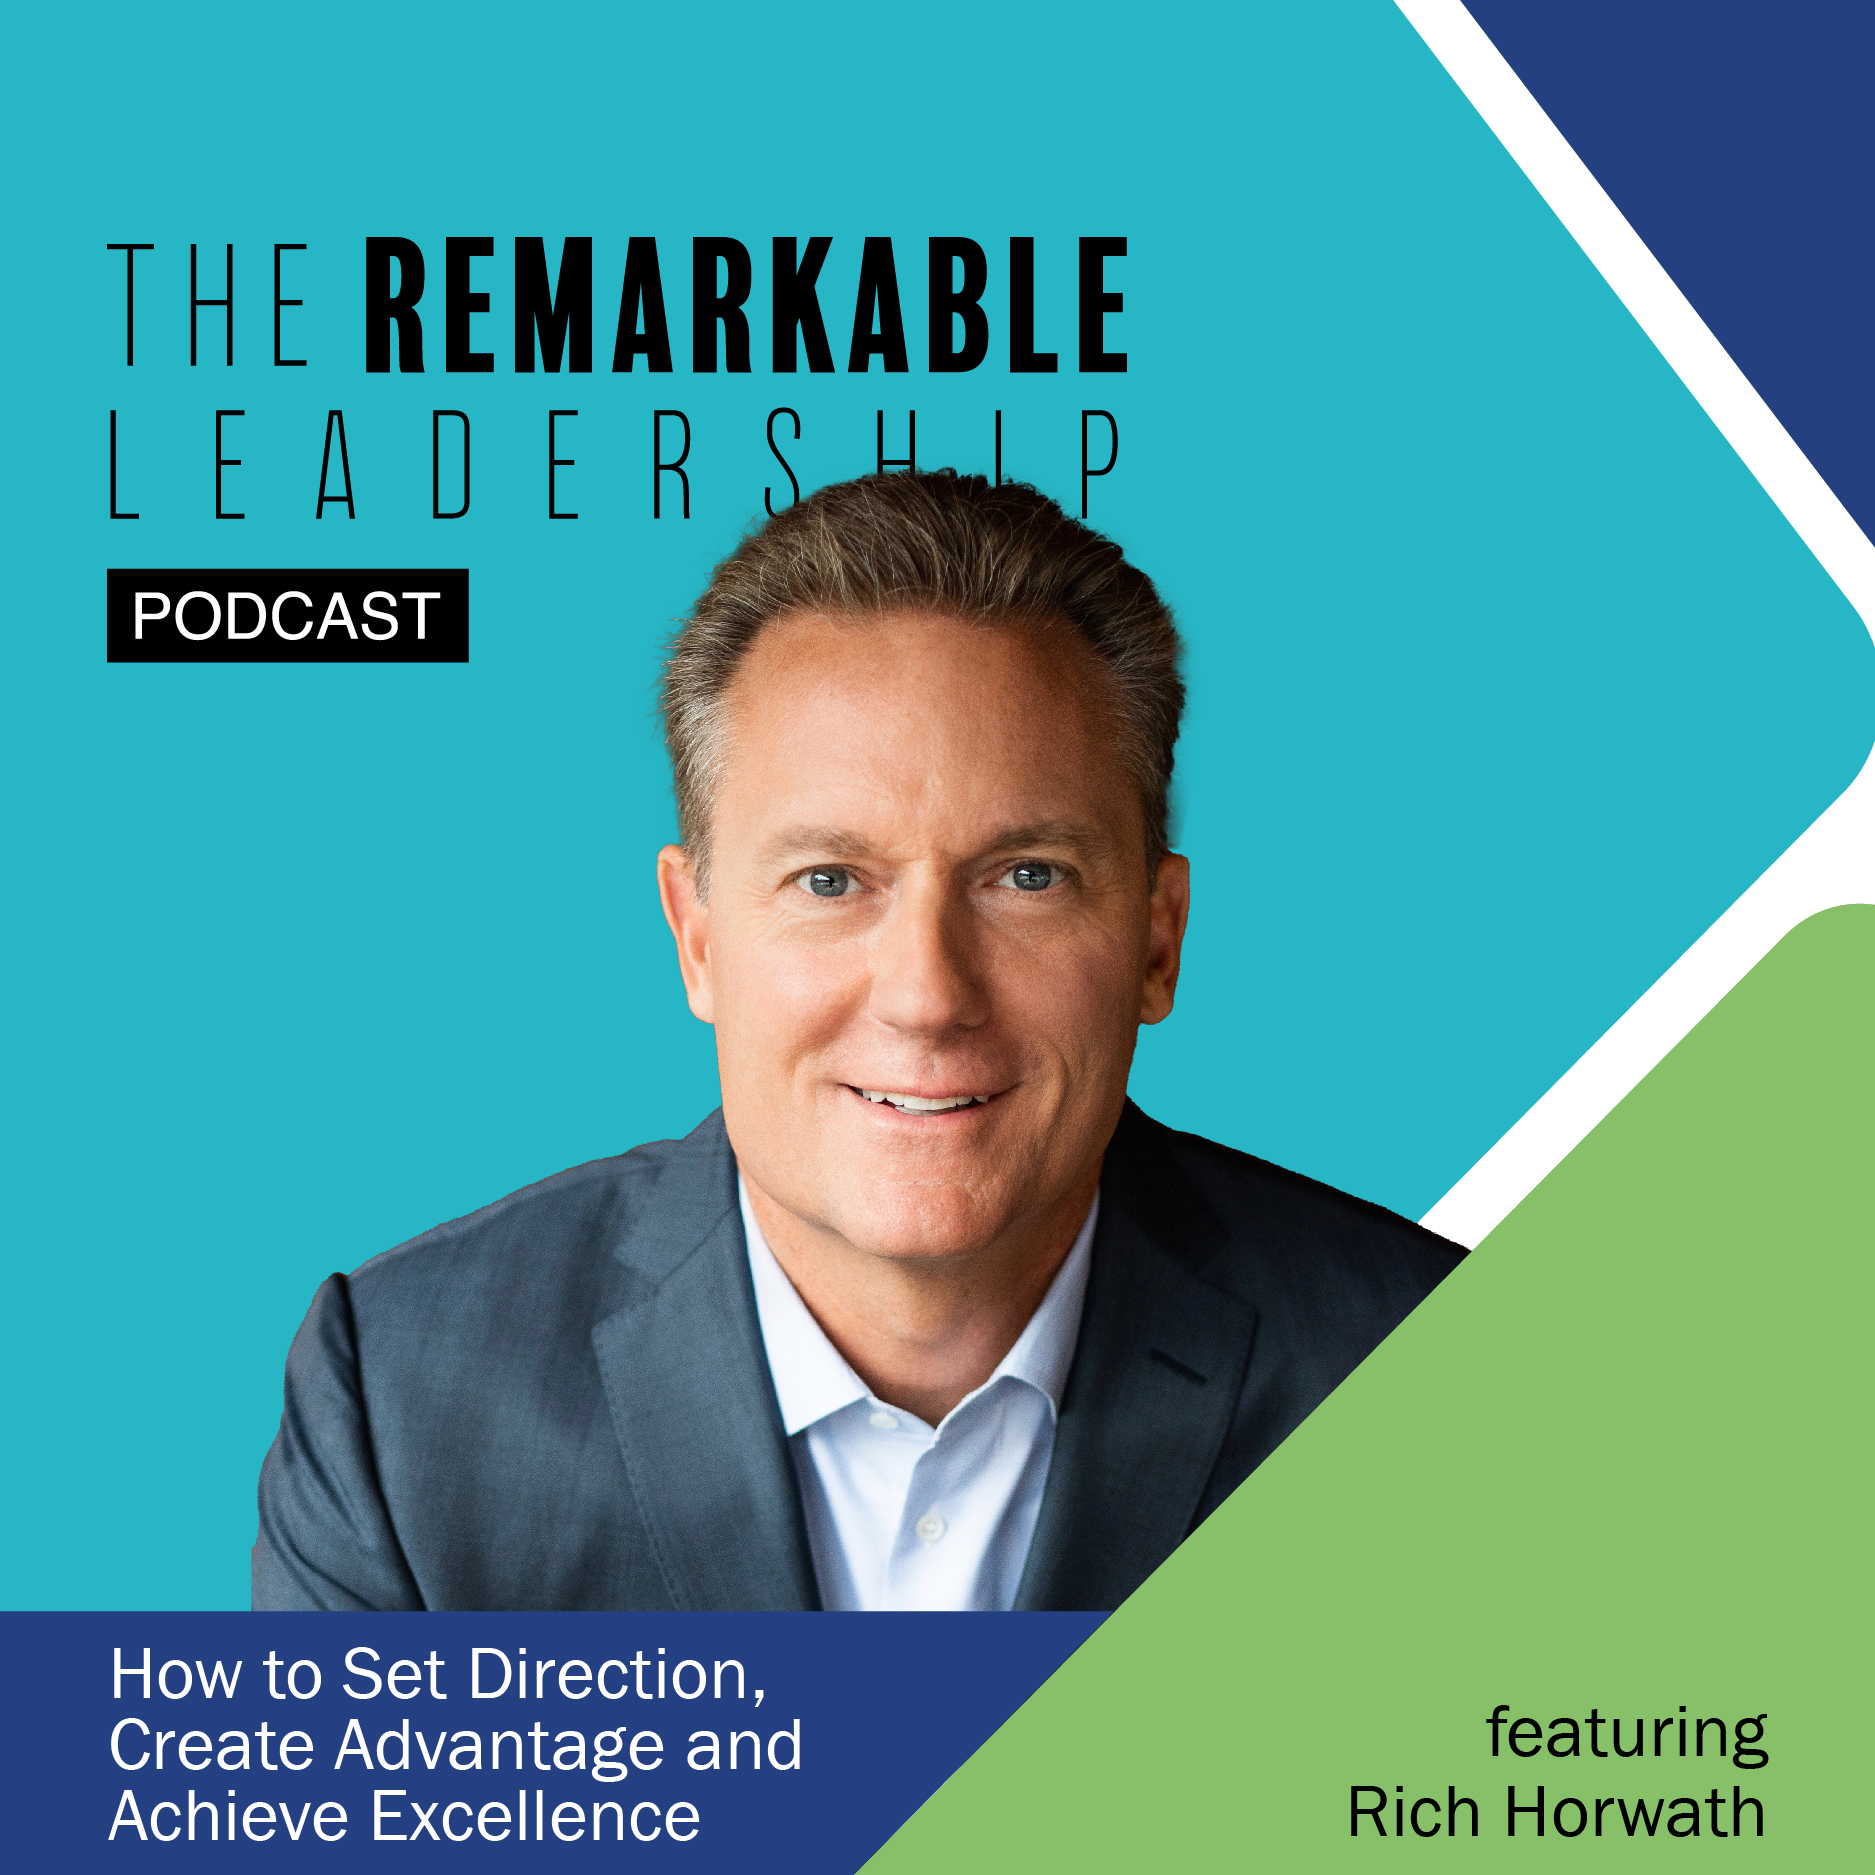 How to Set Direction, Create Advantage and Achieve Excellence with Rich Horwath